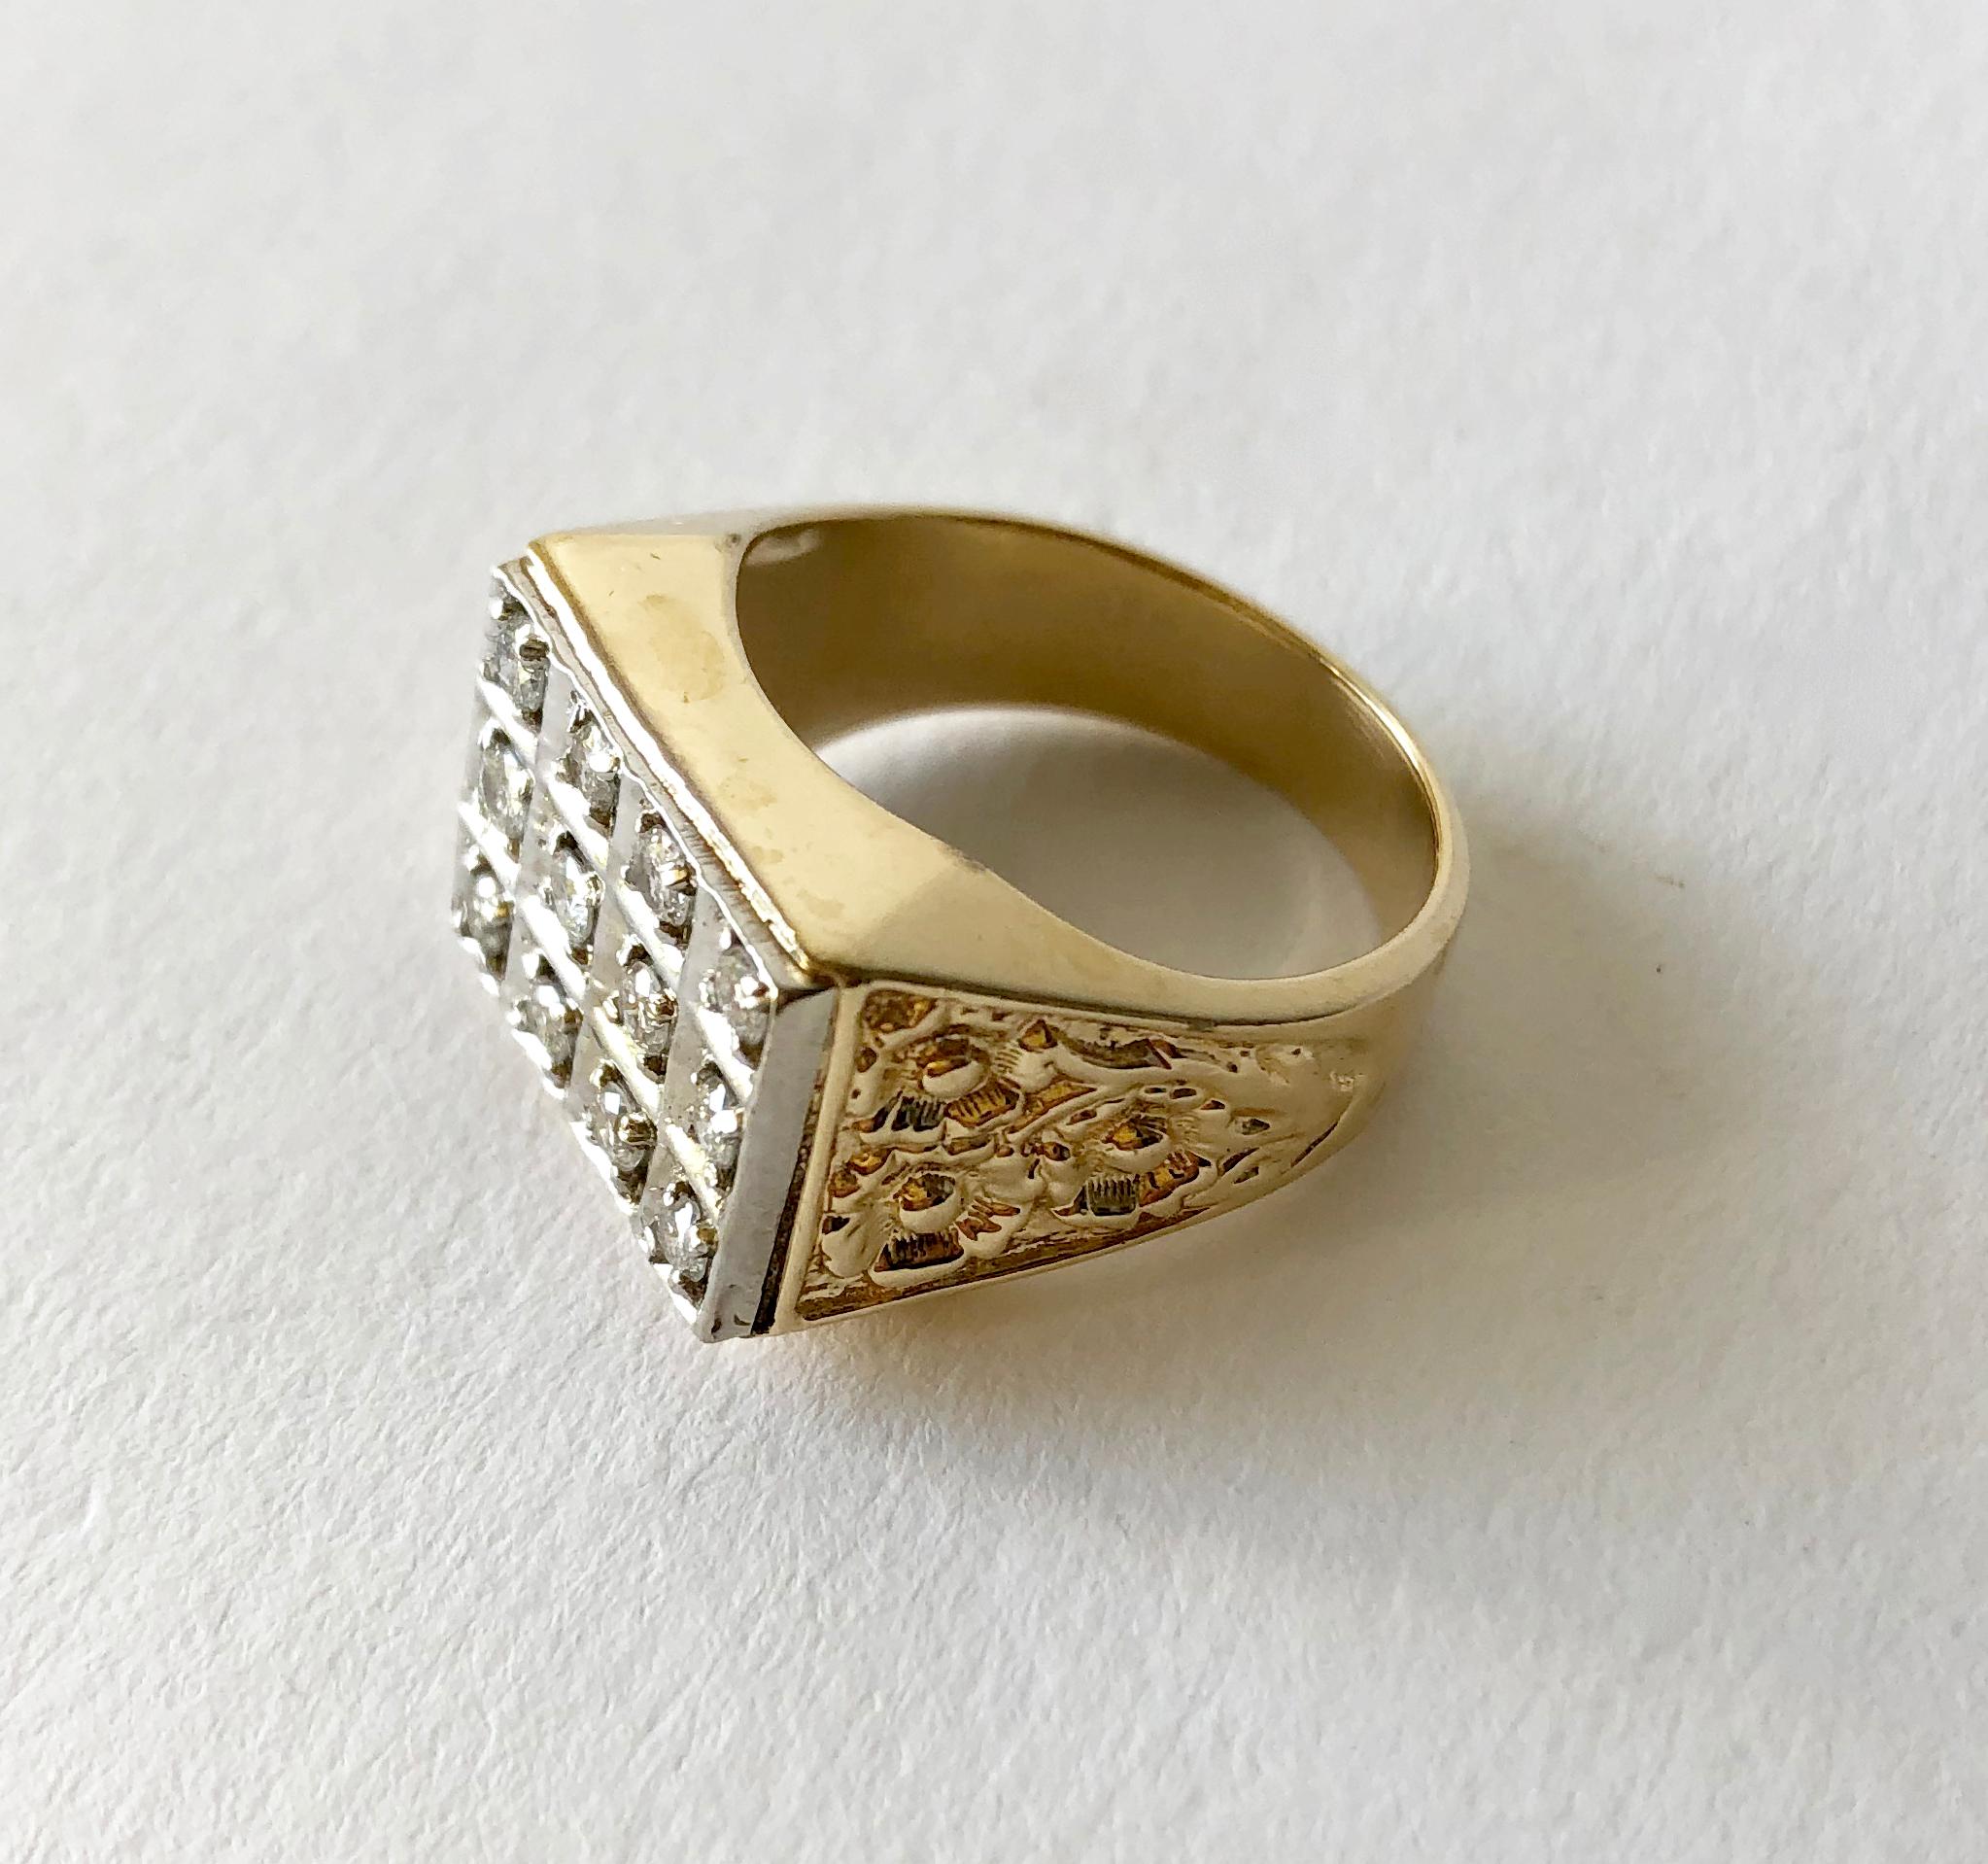 14K gold signet ring with 12 diamonds, circa 1960s. Ring is a finger size 8.75 and is signed 14k. Suitable for a man or woman.  In very good vintage condition. 9.3 grams.